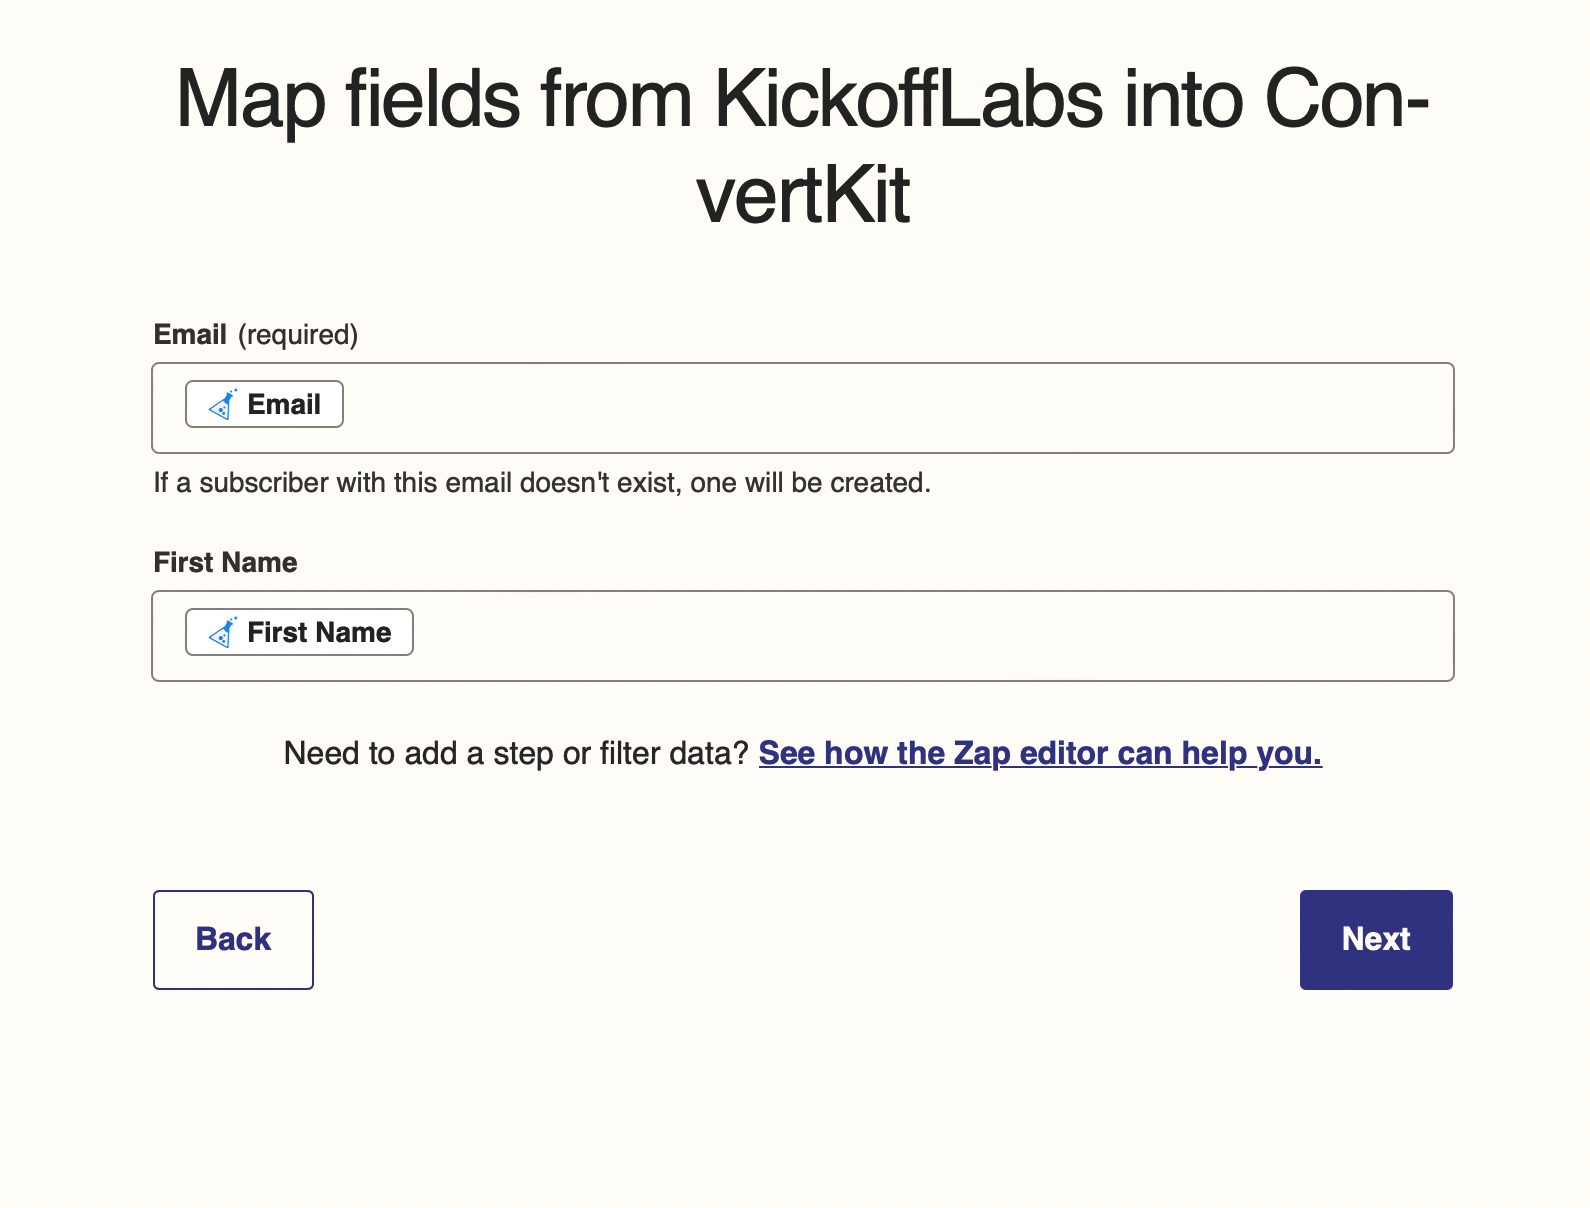 map kickofflabs fields to convertkit